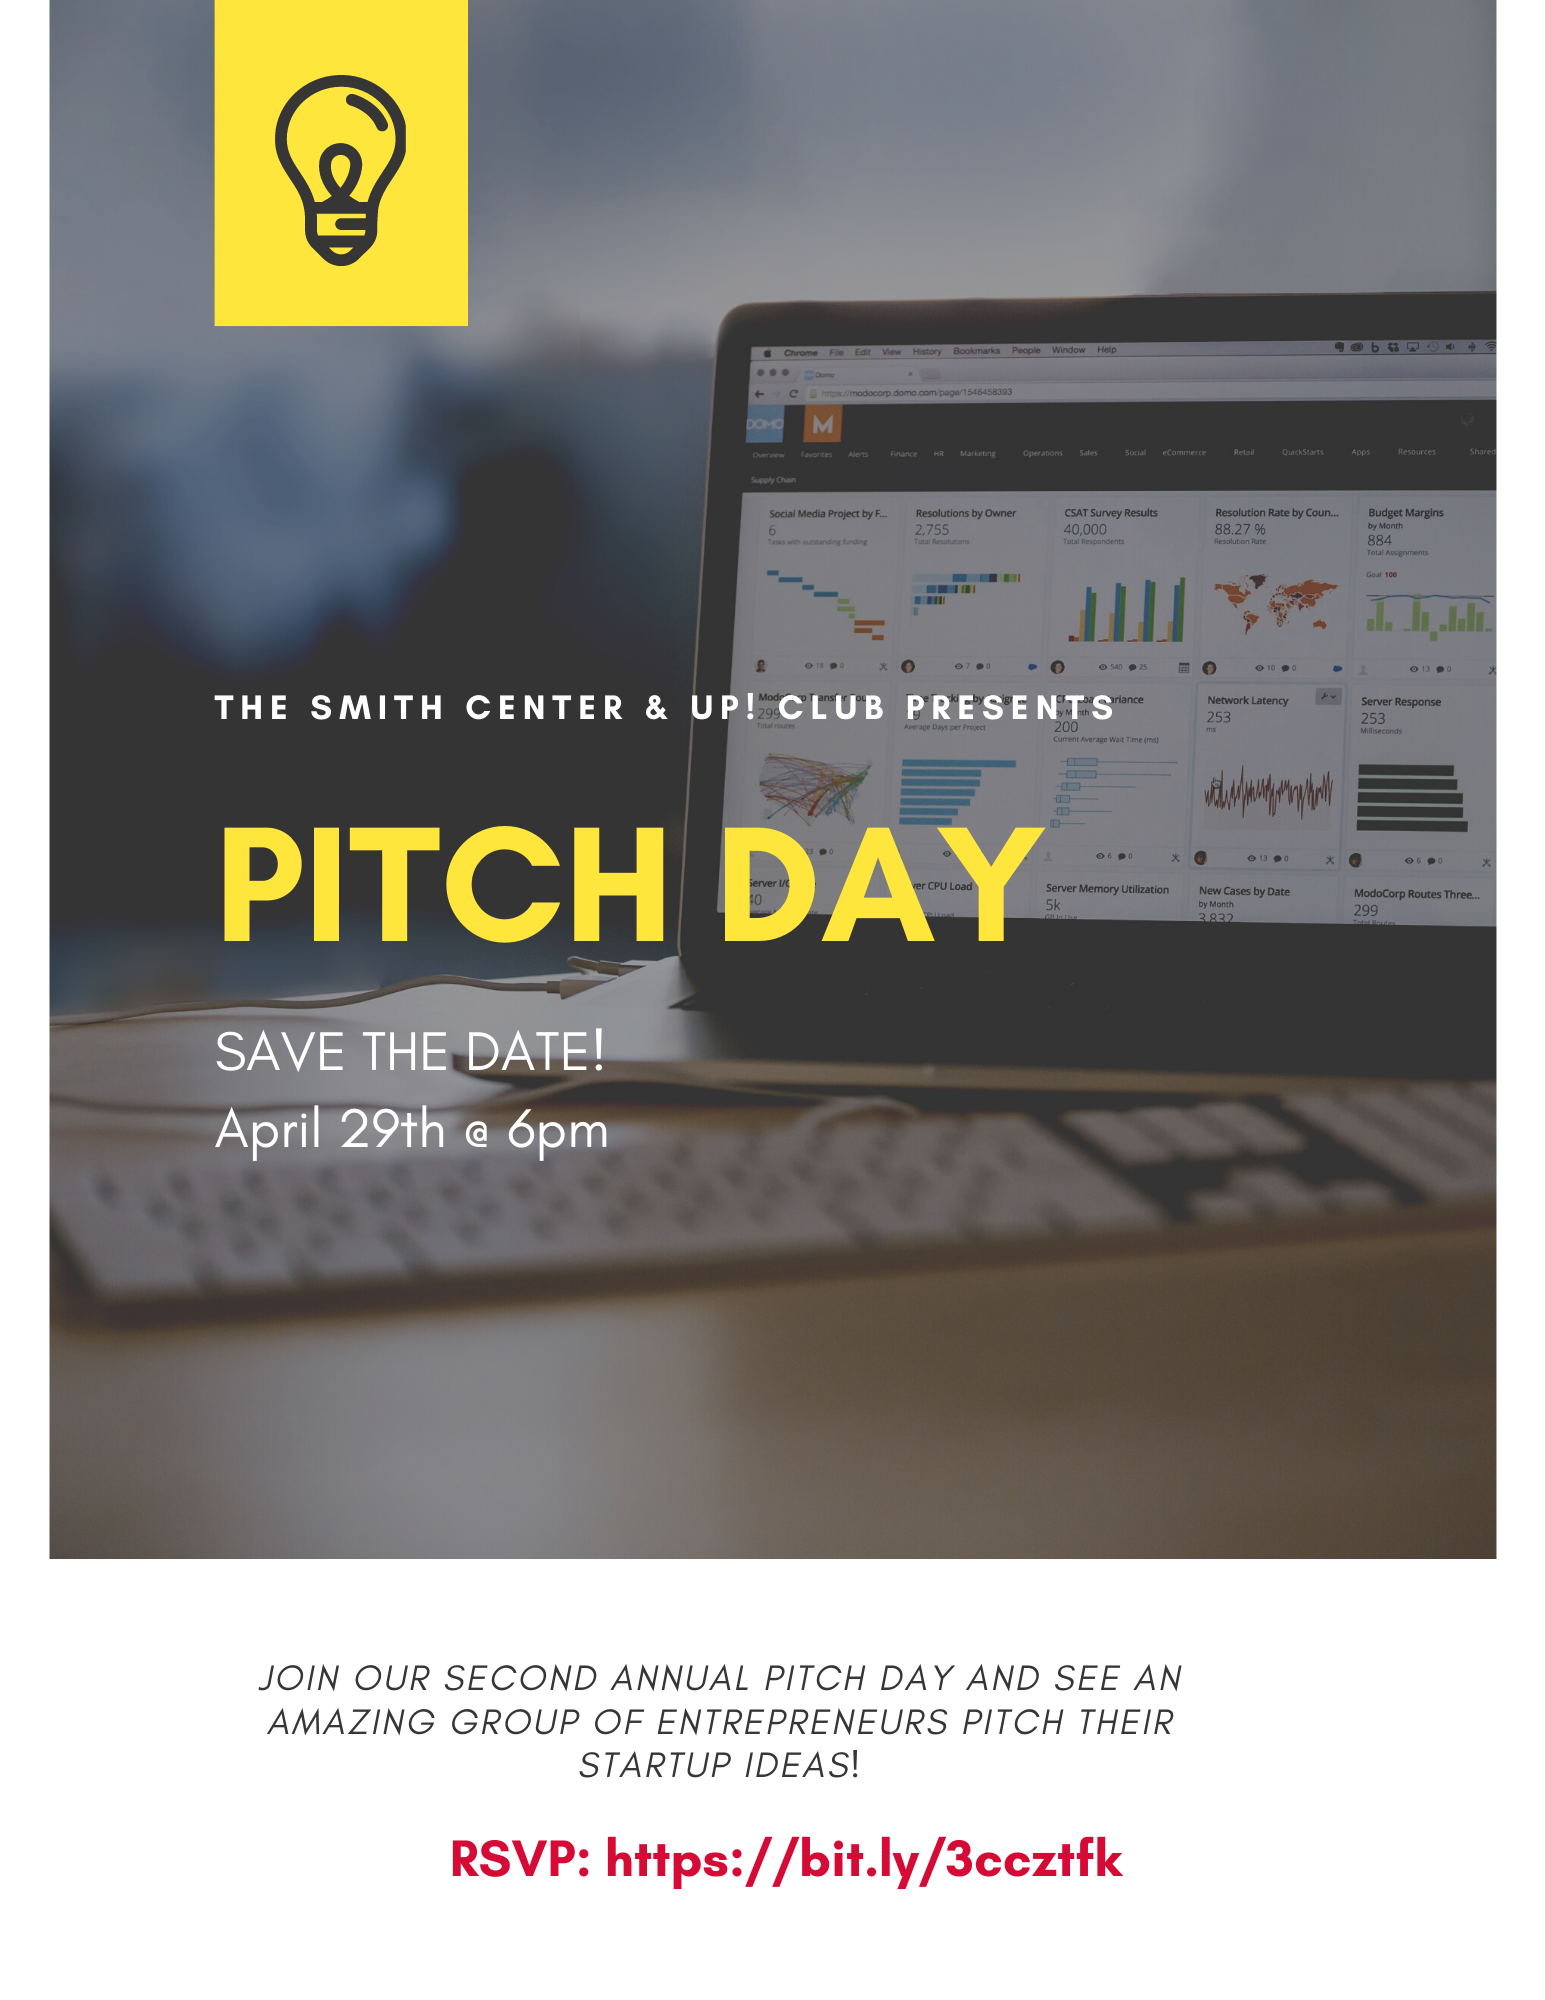 Smith Ctr Pitch Day Save the Date